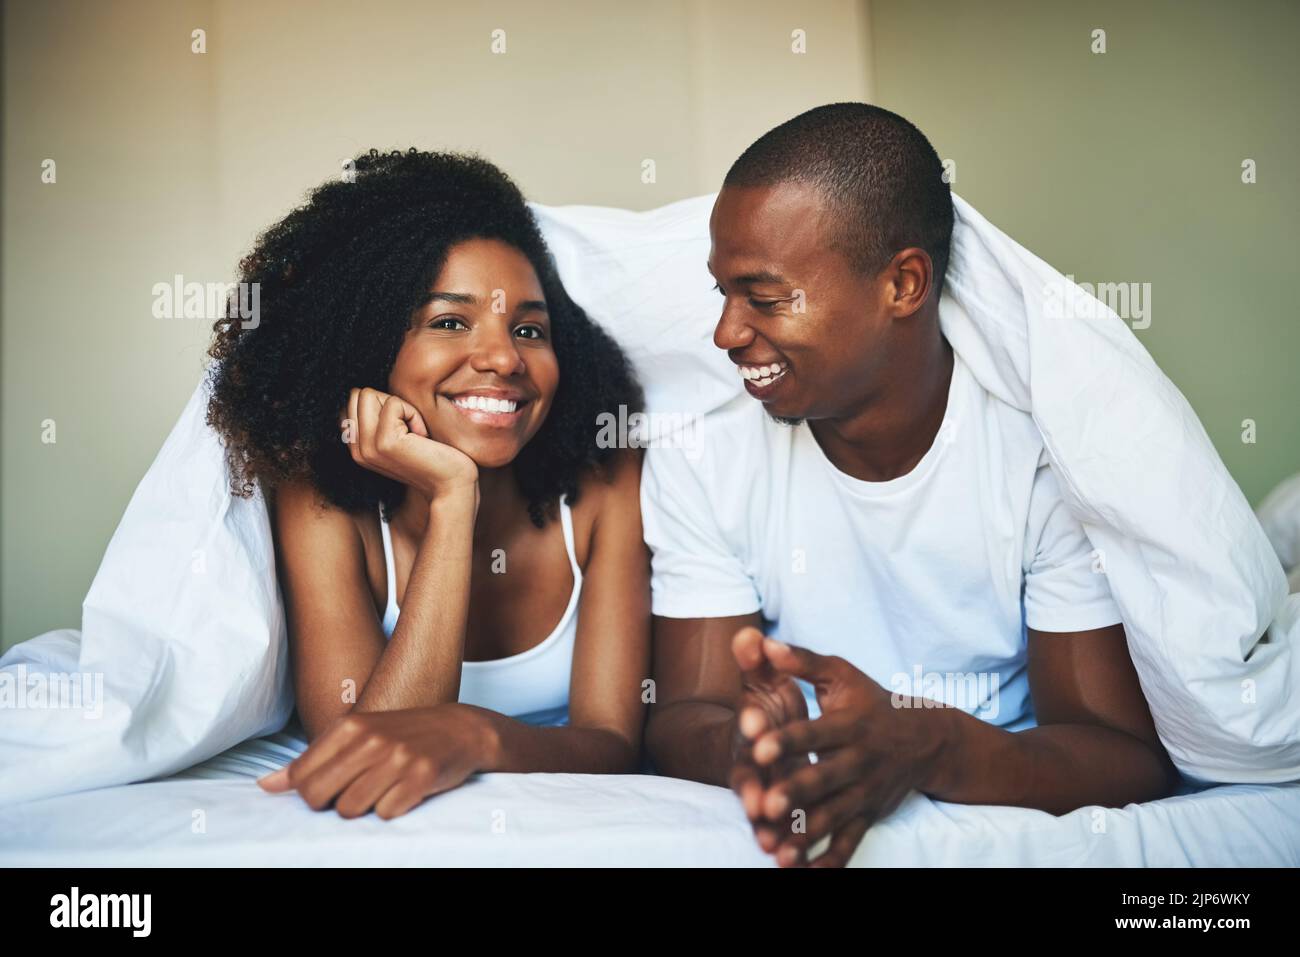 Love is worth waking up to. Portrait of a happy young couple relaxing under a duvet in their bedroom. Stock Photo